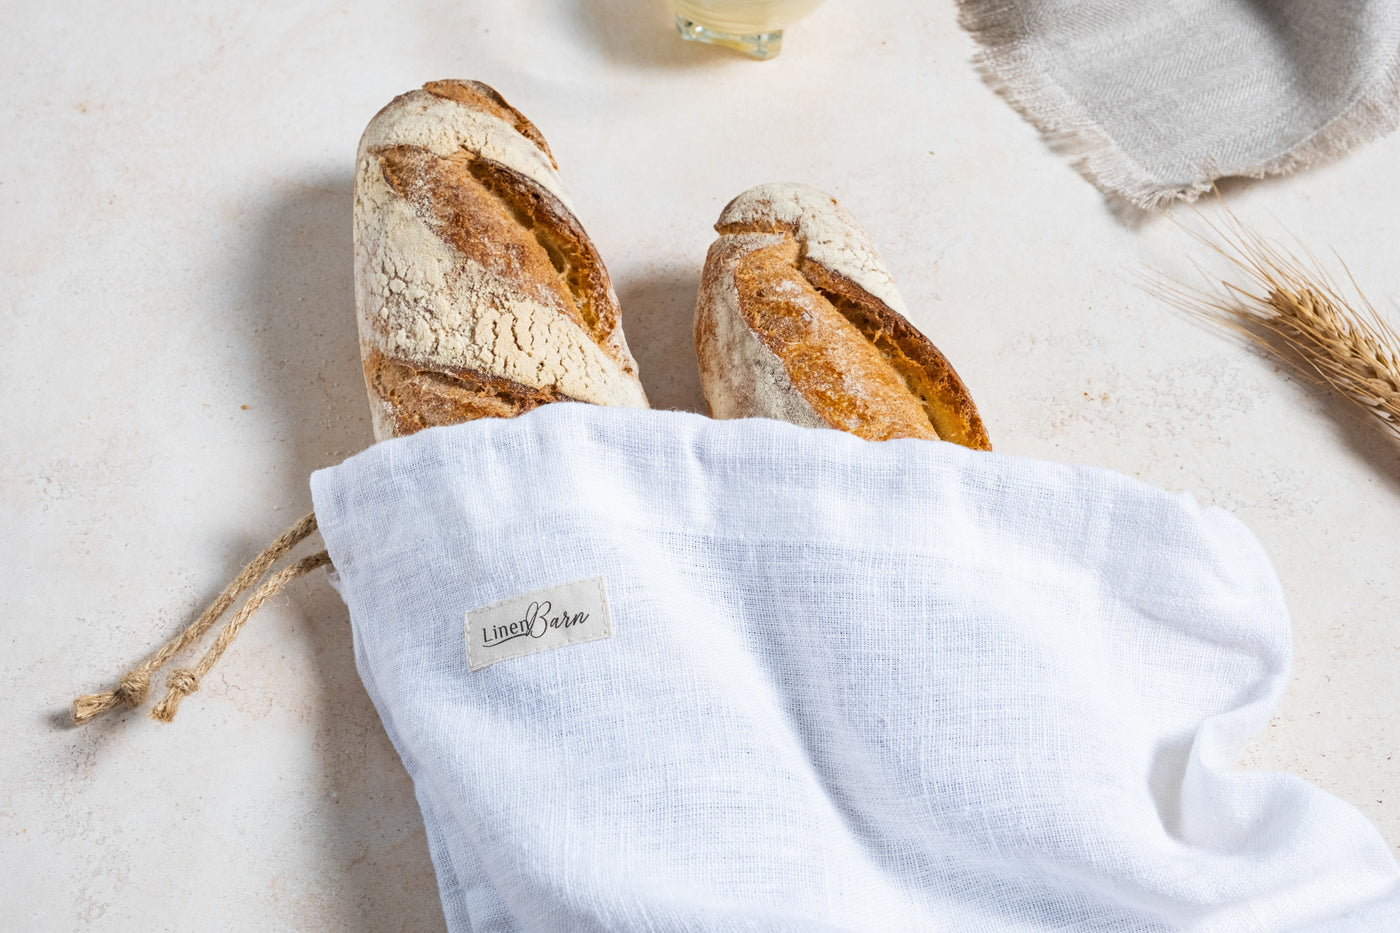 Linen bread bags: A sustainable alternative to plastic